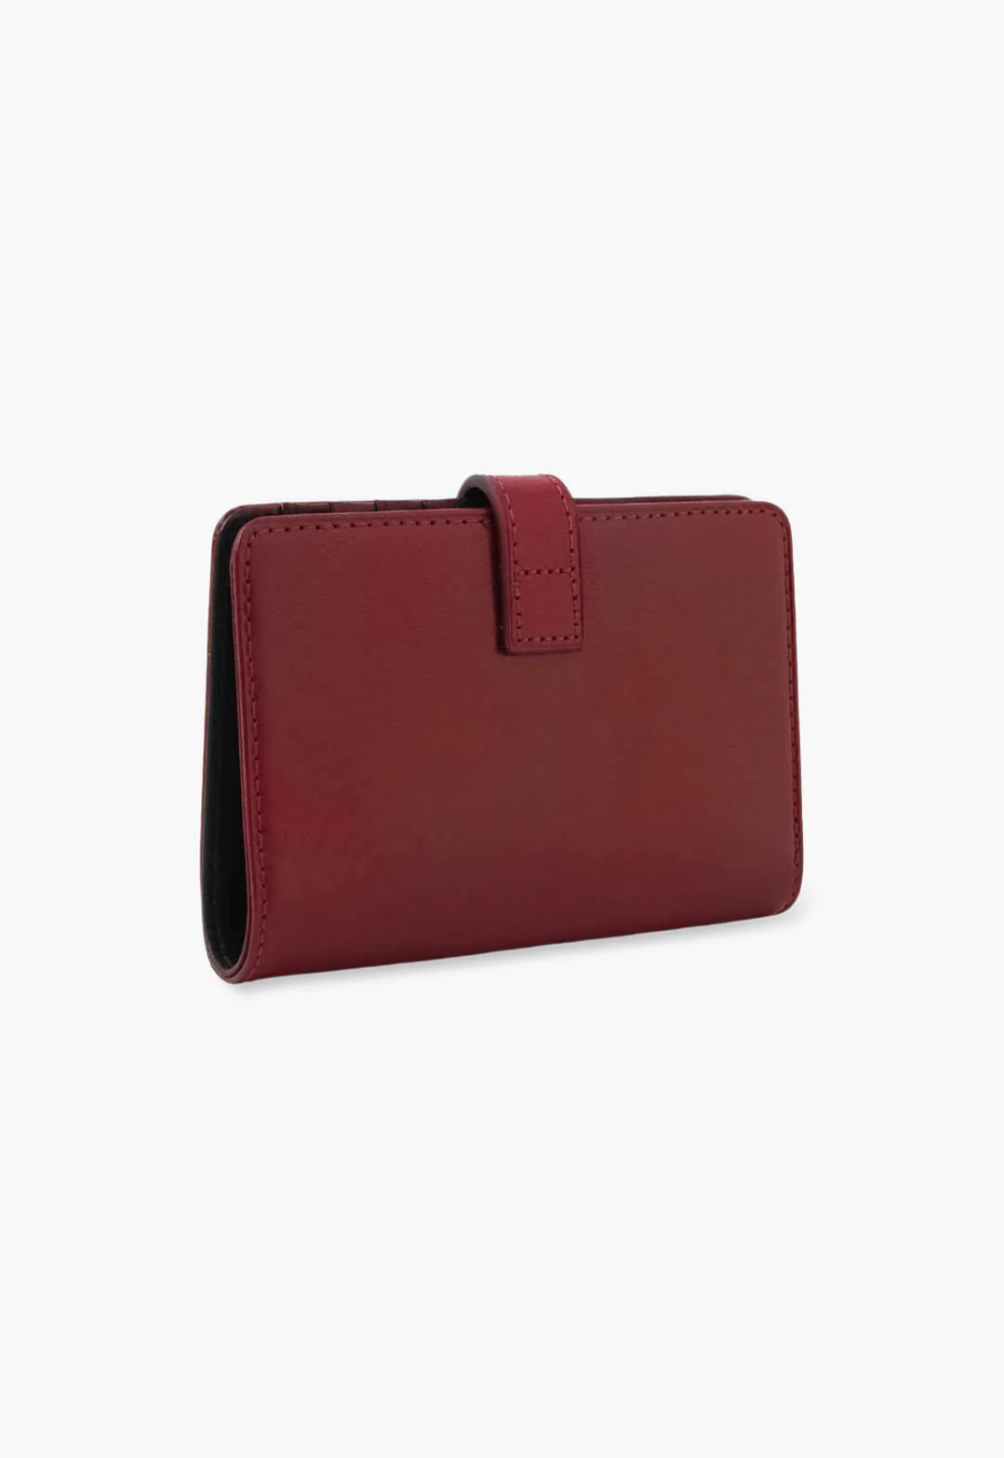 Small Roger Wallet wine in a rectangular shape, flap across the top to close it